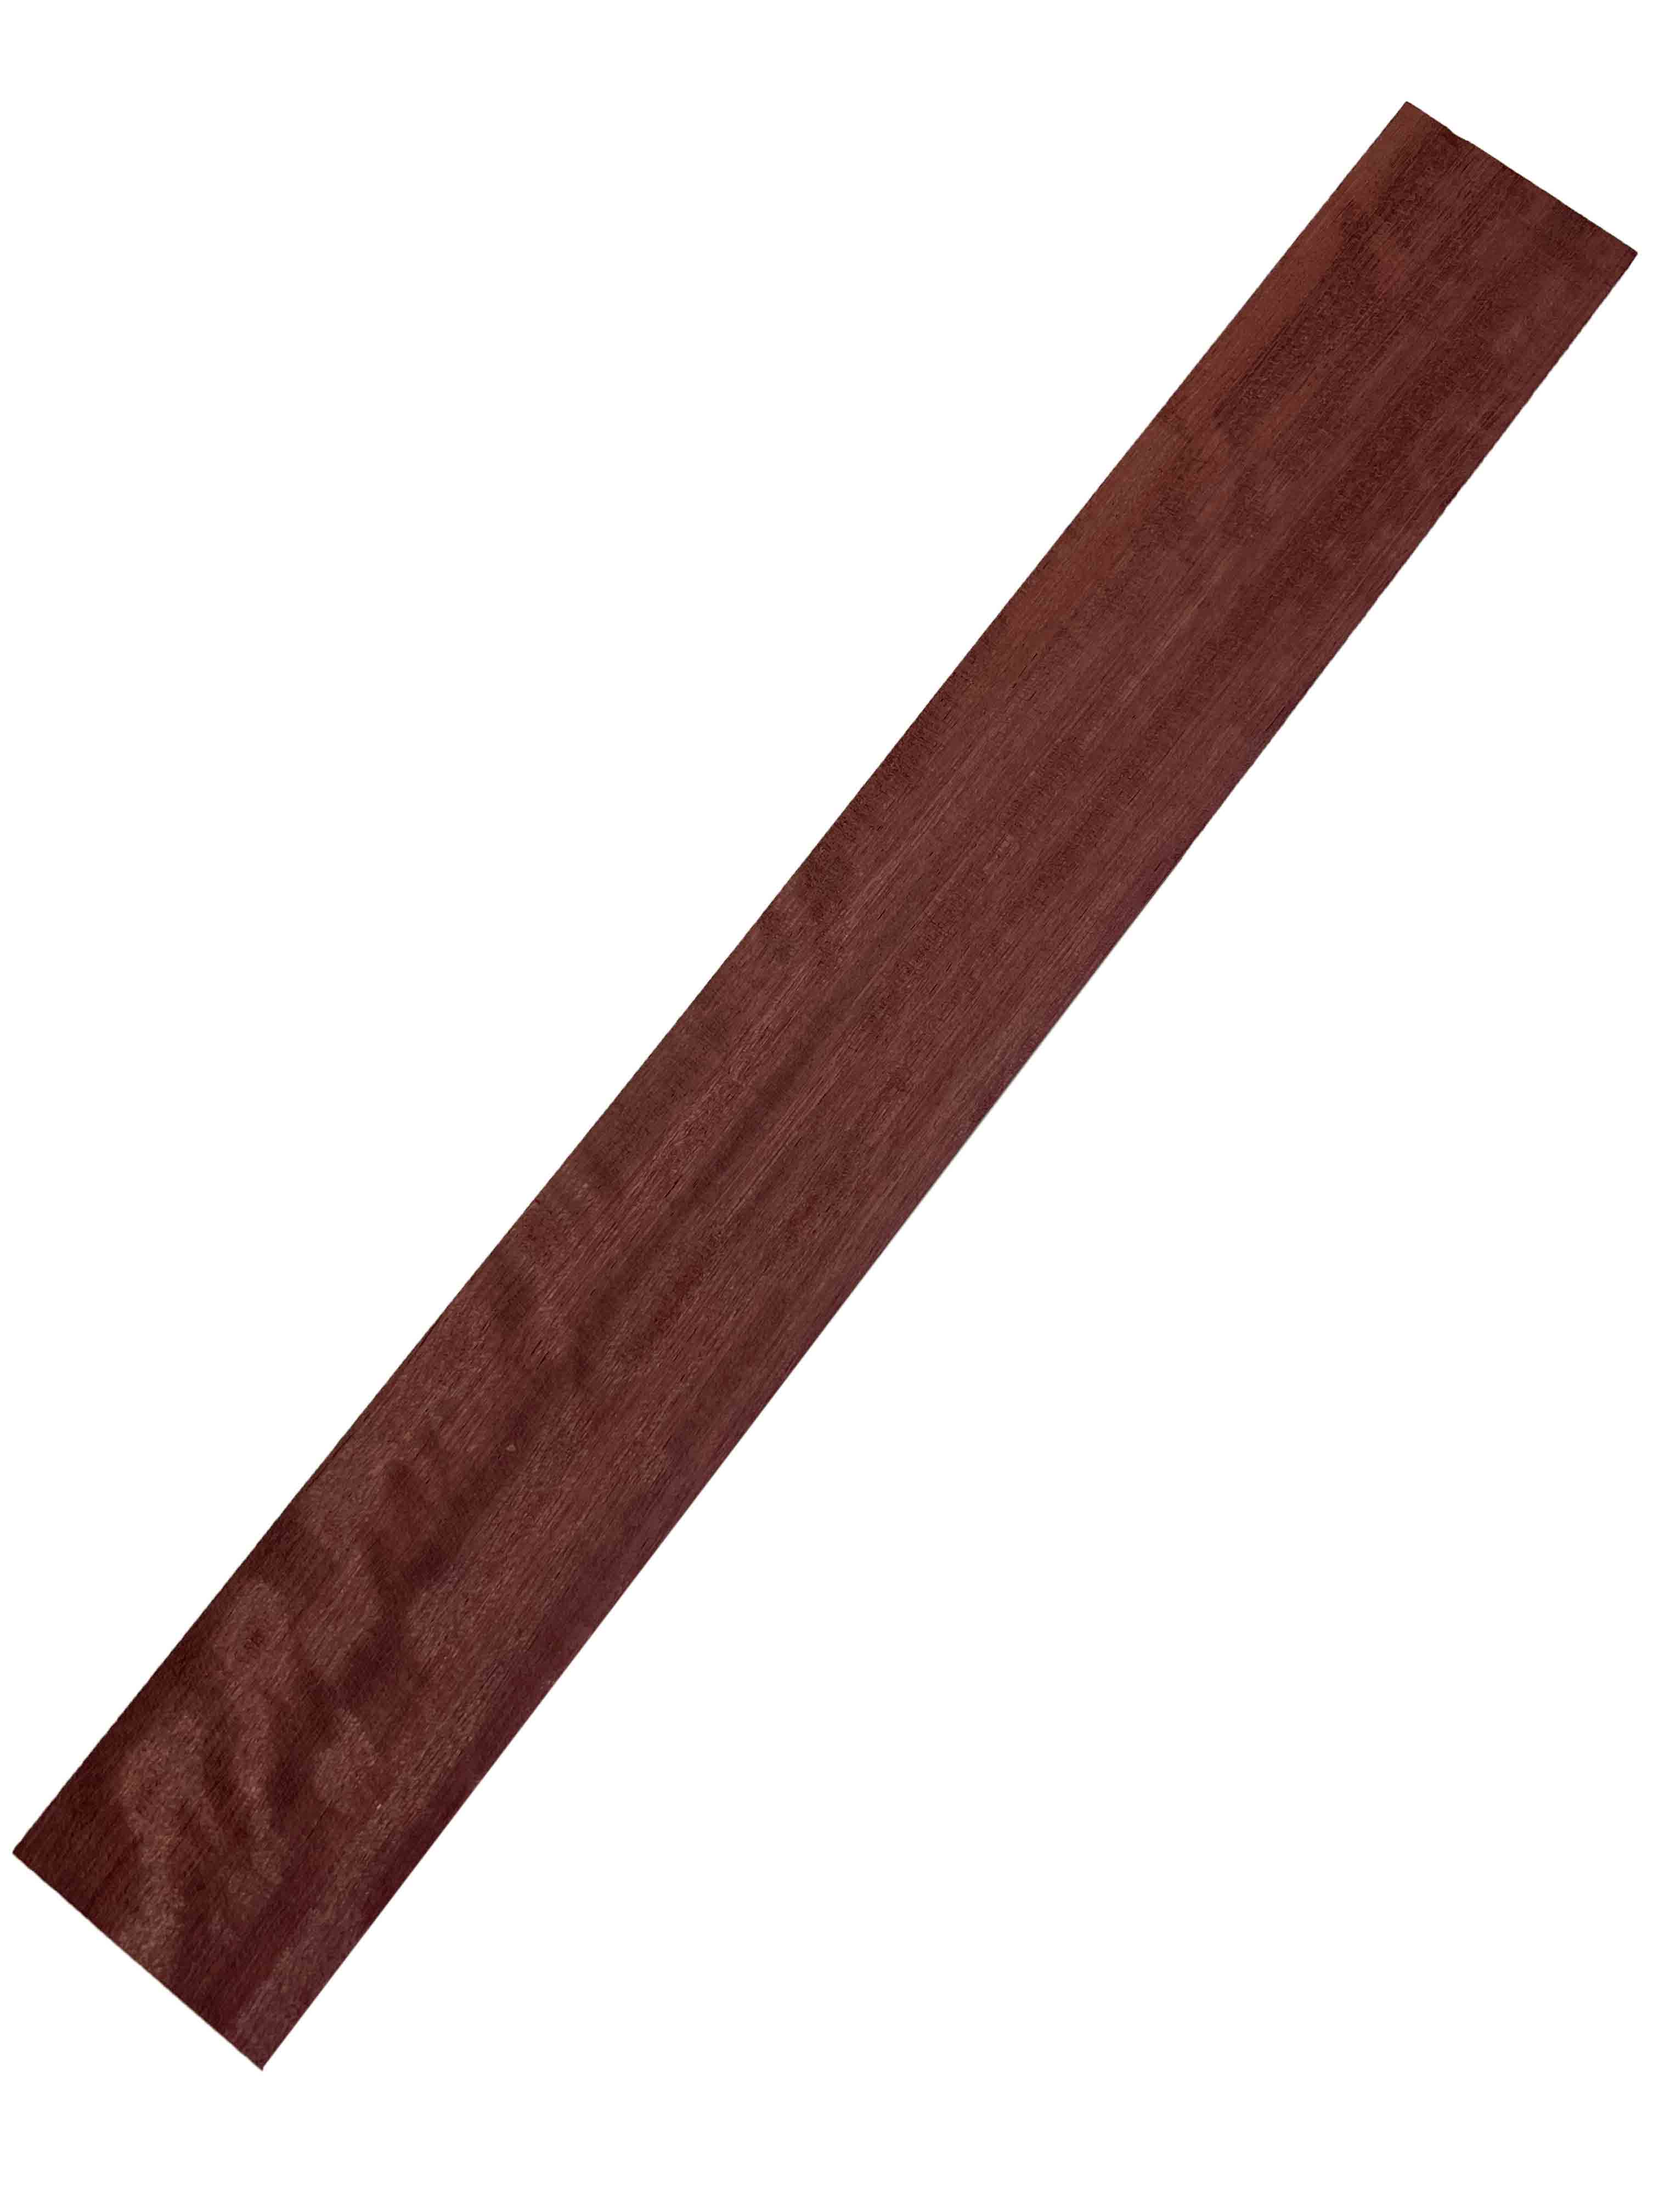 Purpleheart Thin Stock Lumber Boards Wood Crafts - Exotic Wood Zone - Buy online Across USA 